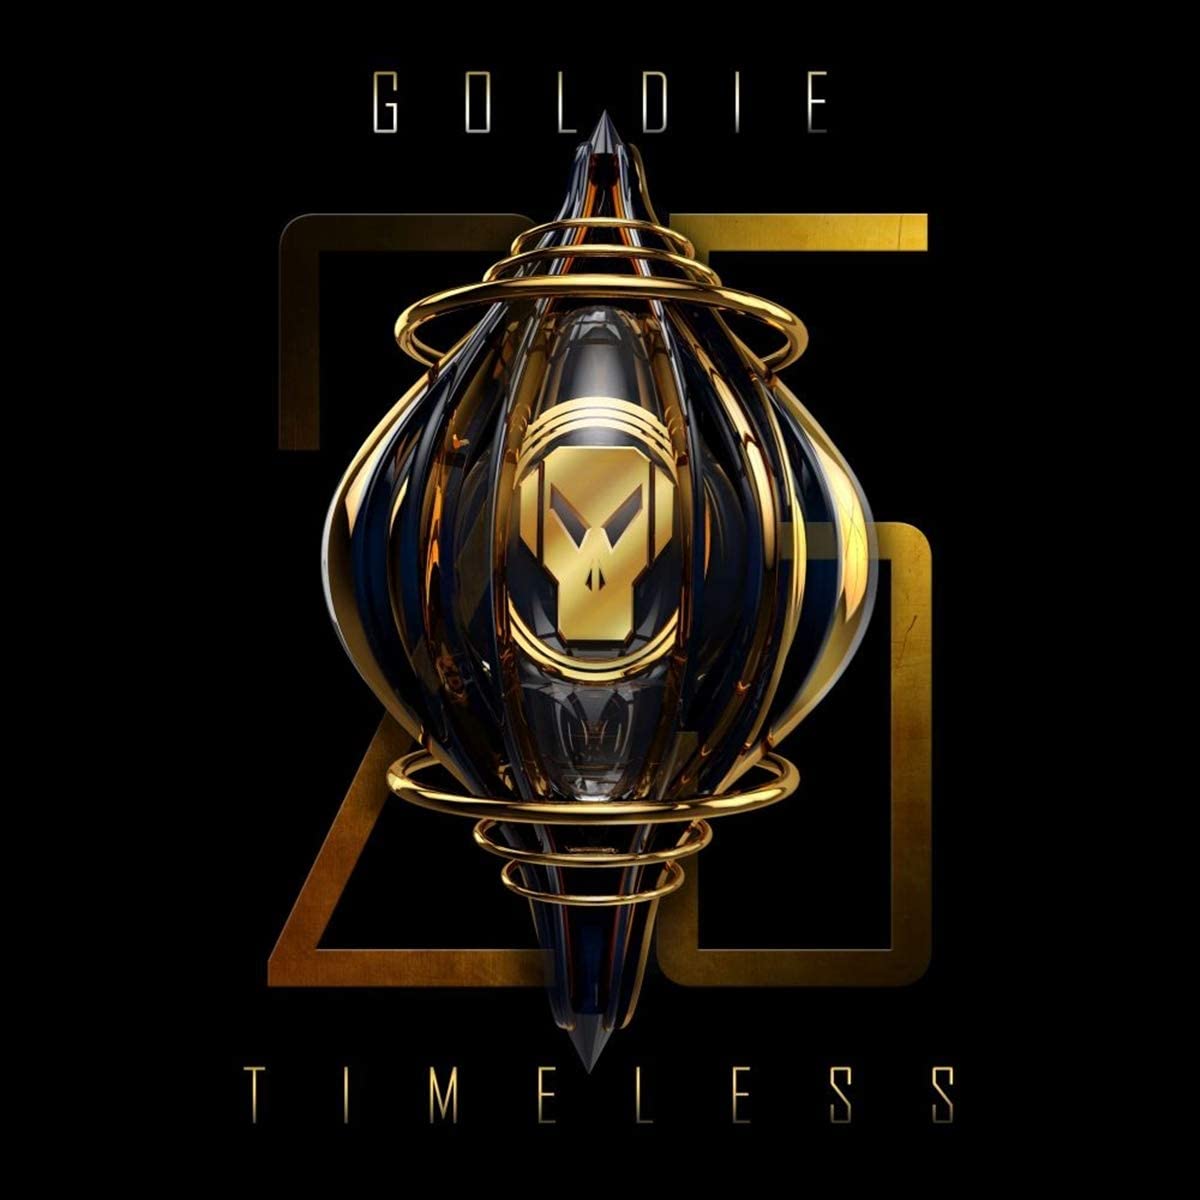 GOLDIE - Timeless (25 Year Anniversary Edition) - 3CD